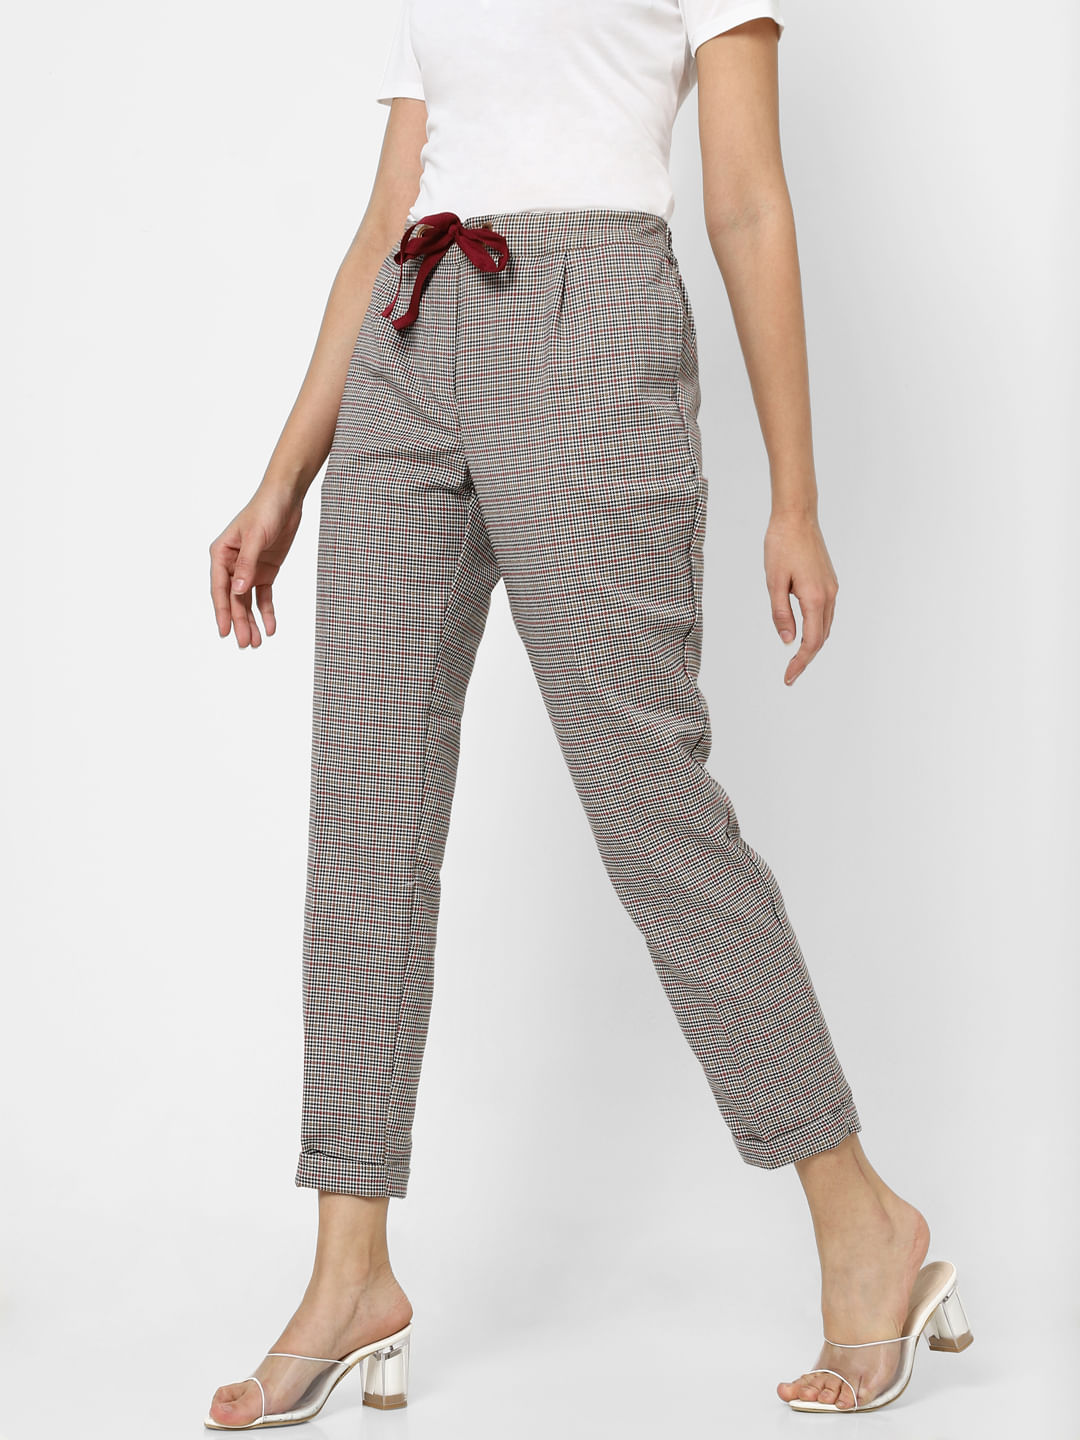 High Waist Plaid Sweatpants For Women Fashionable Streetwear Checked  Trousers Women With Cargo Design, Korean Style Perfect For Jogging And  Hiking 210507 From Luo02, $15.4 | DHgate.Com